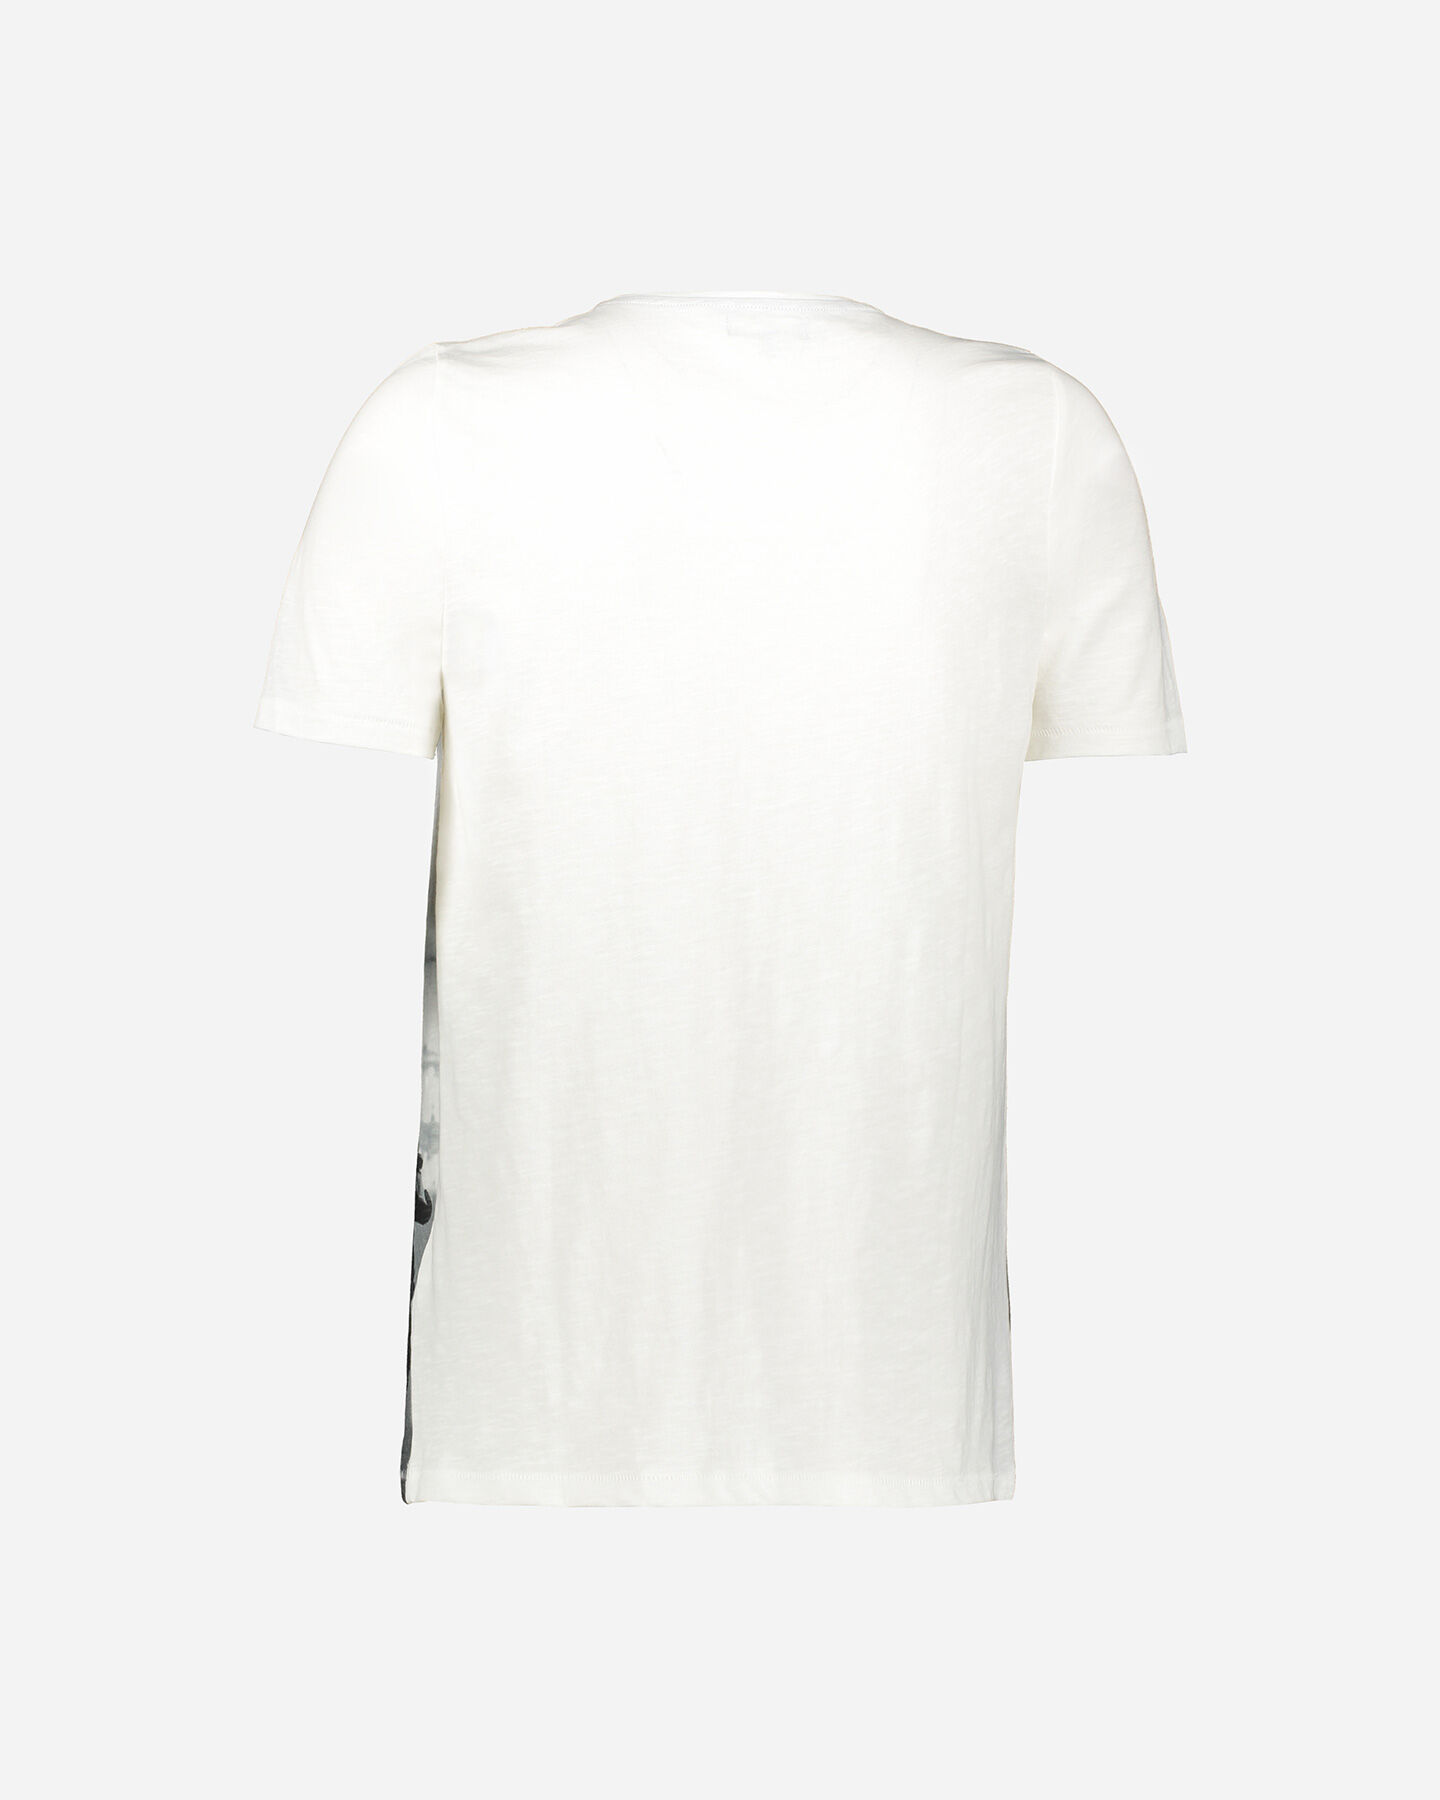  T-Shirt MISTRAL SURF M S4073896|001|XS scatto 1